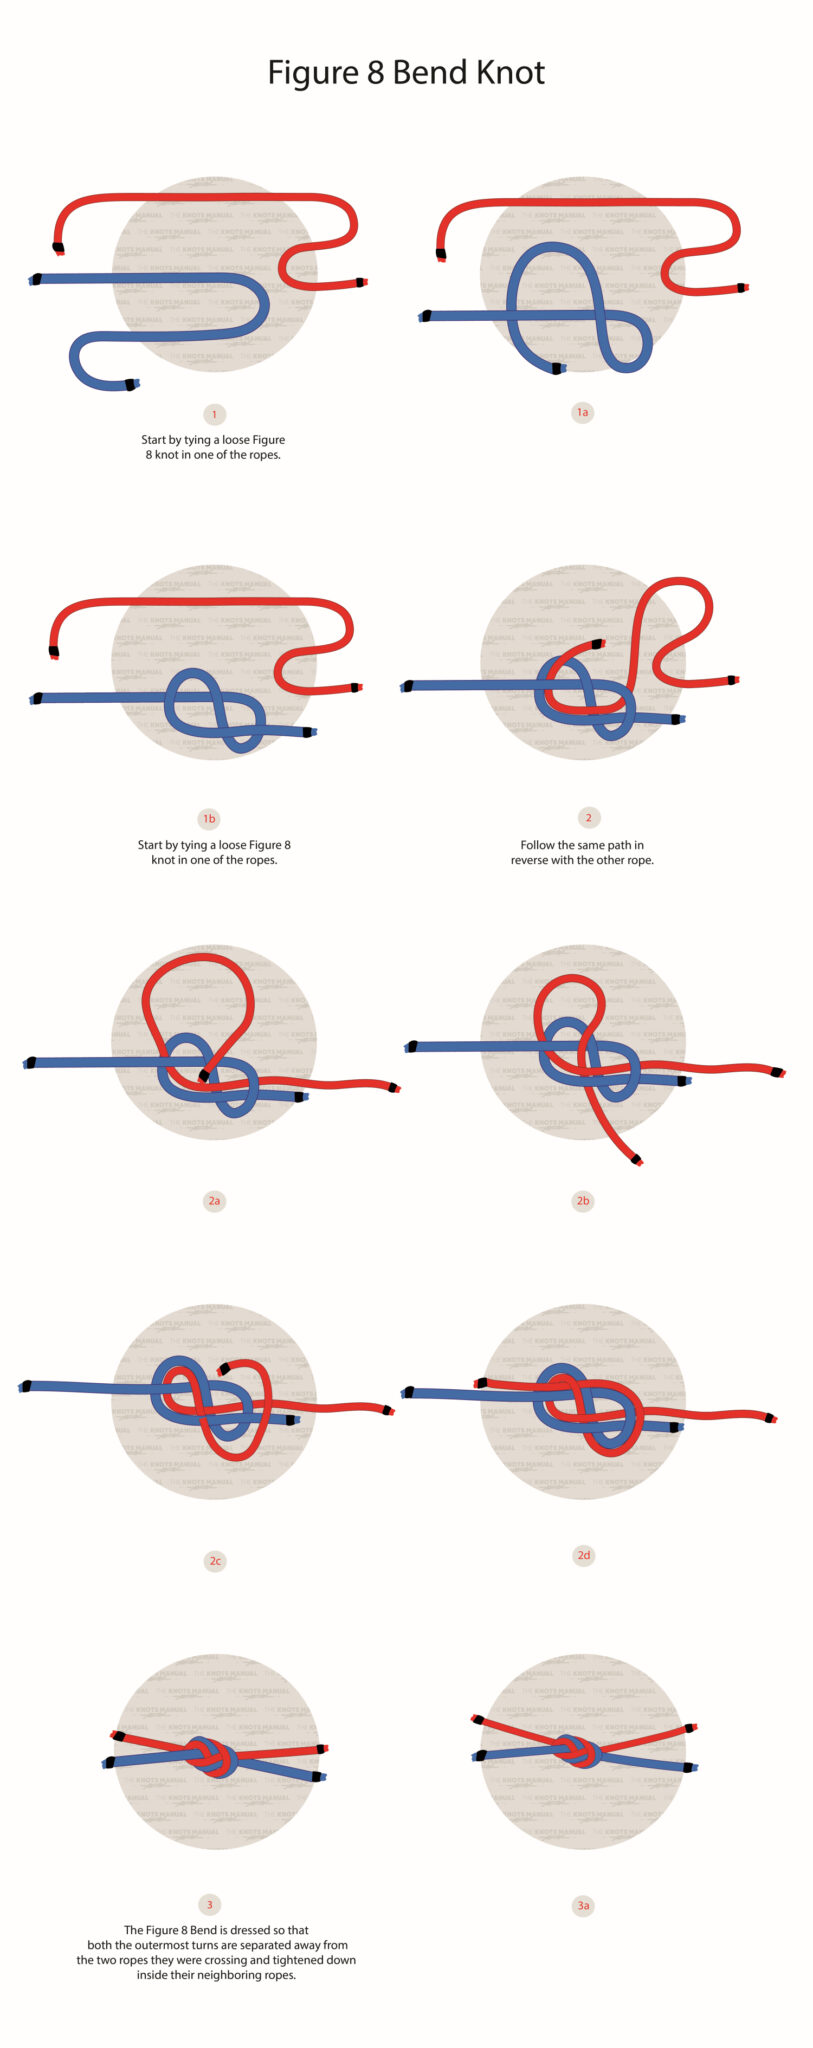 How to Tie a Figure 8 Bend Knot (Flemish Bend)